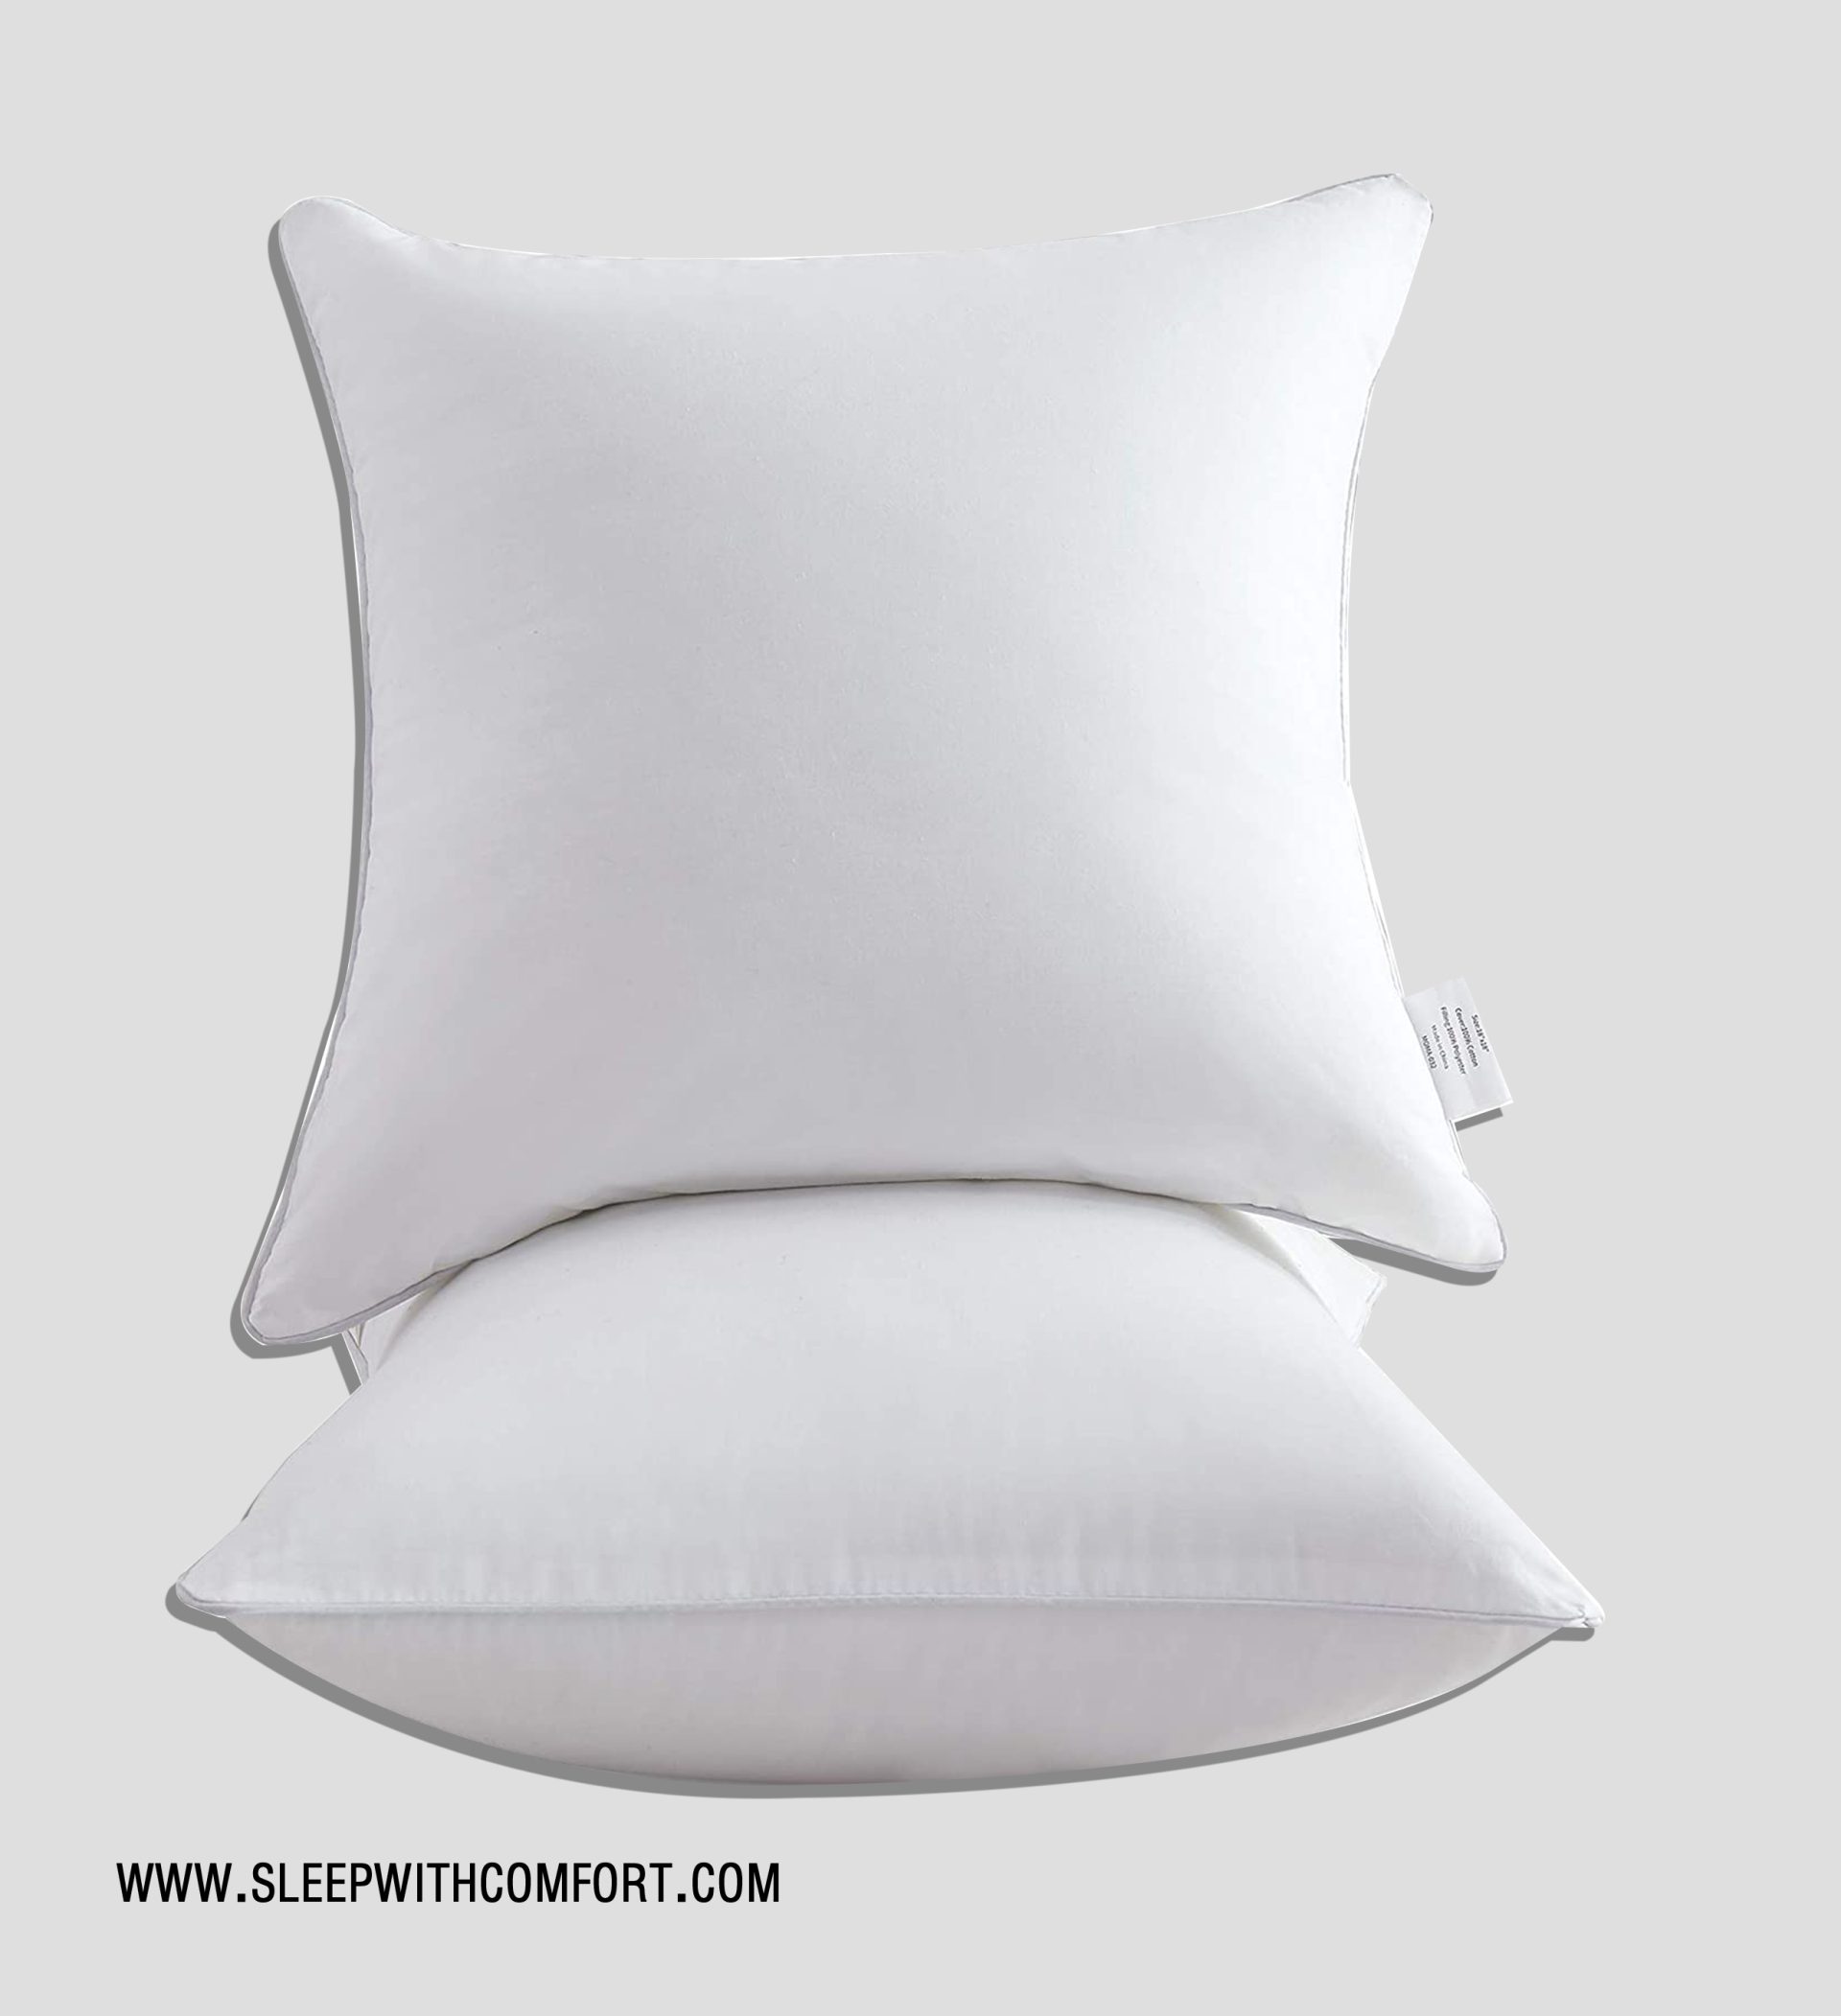 Top 9 Best Pillow Inserts To Buy in 2022